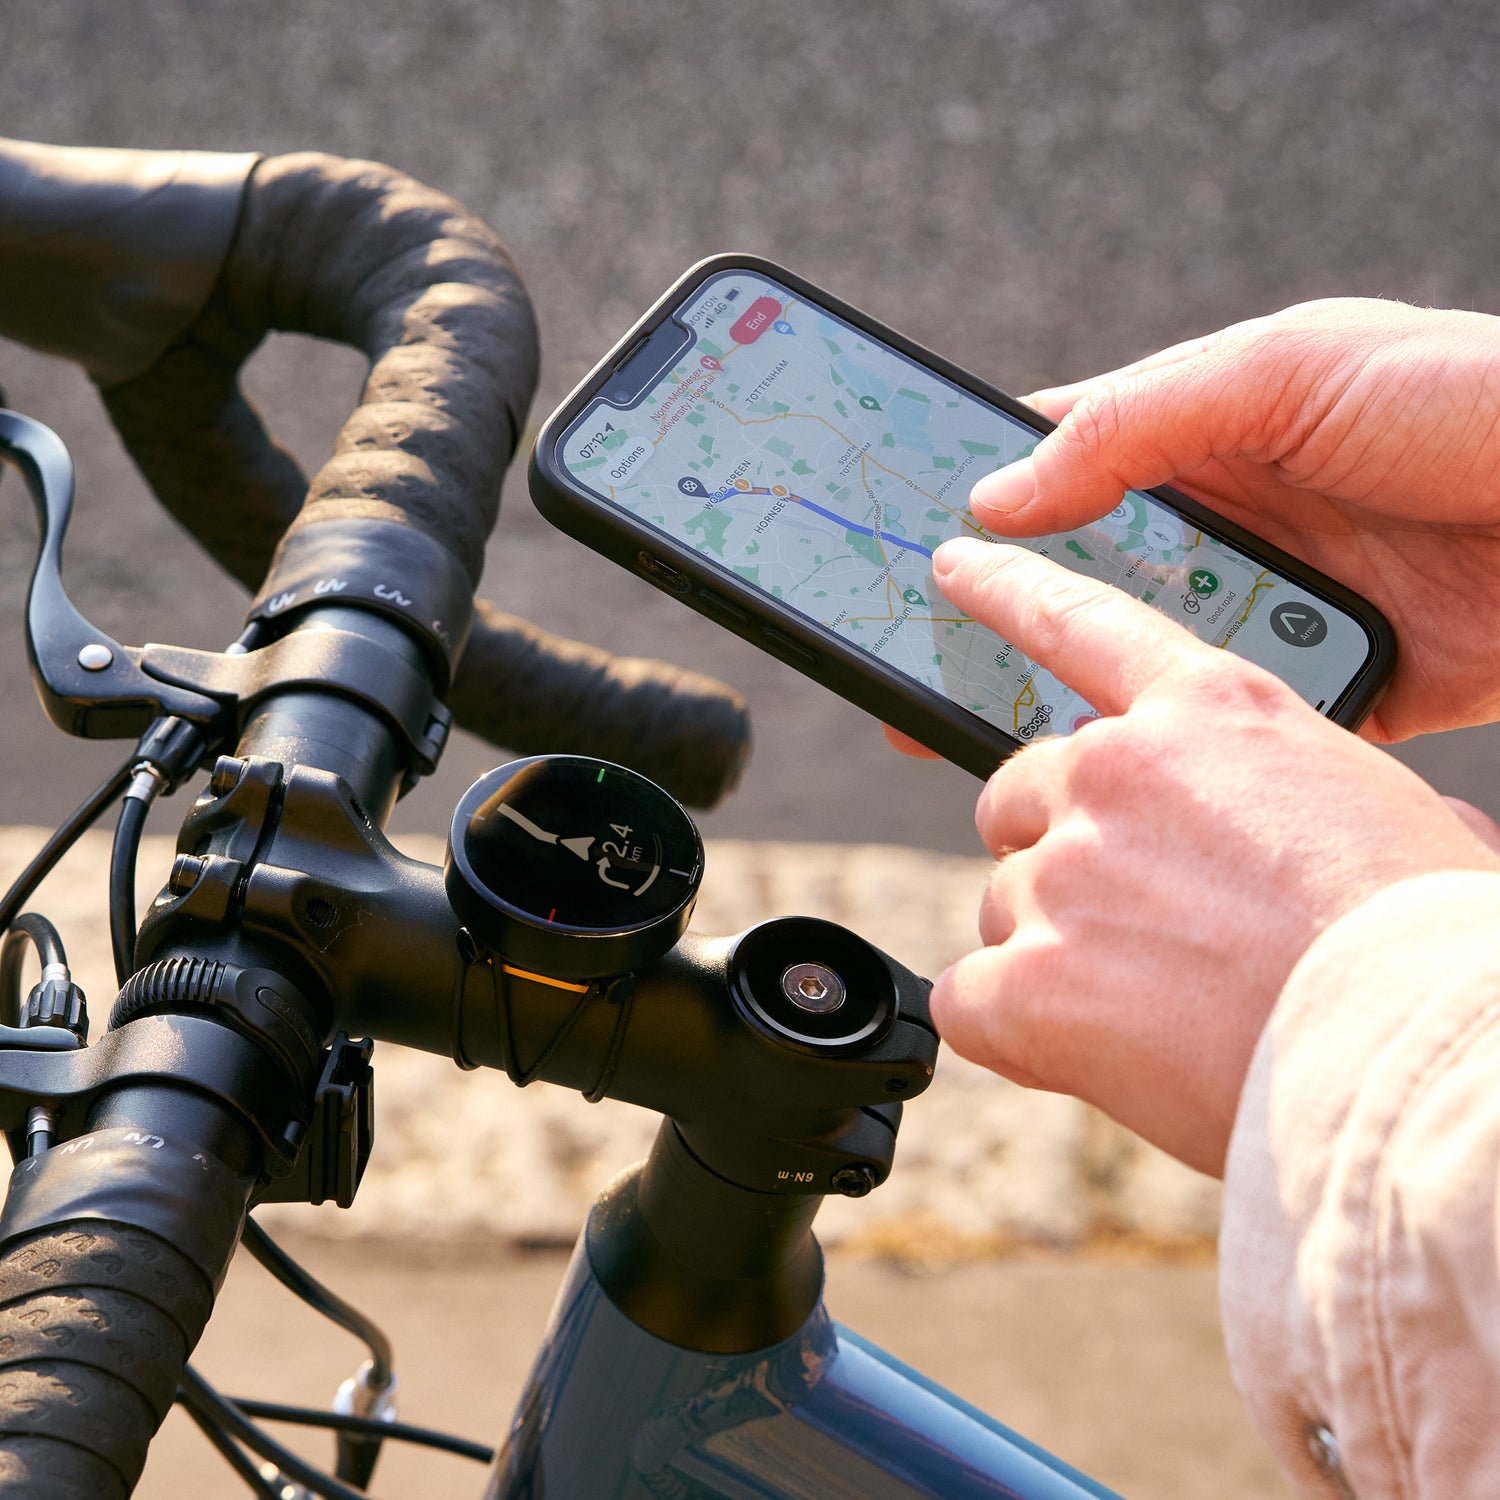  Beeline Moto GPS Computer - Black, Worldwide Route Planning, Weatherproof & 30 Hours Battery Life, USB Charging, Sat Nav for  Motorcycle & Scooter with Strap Mount Included